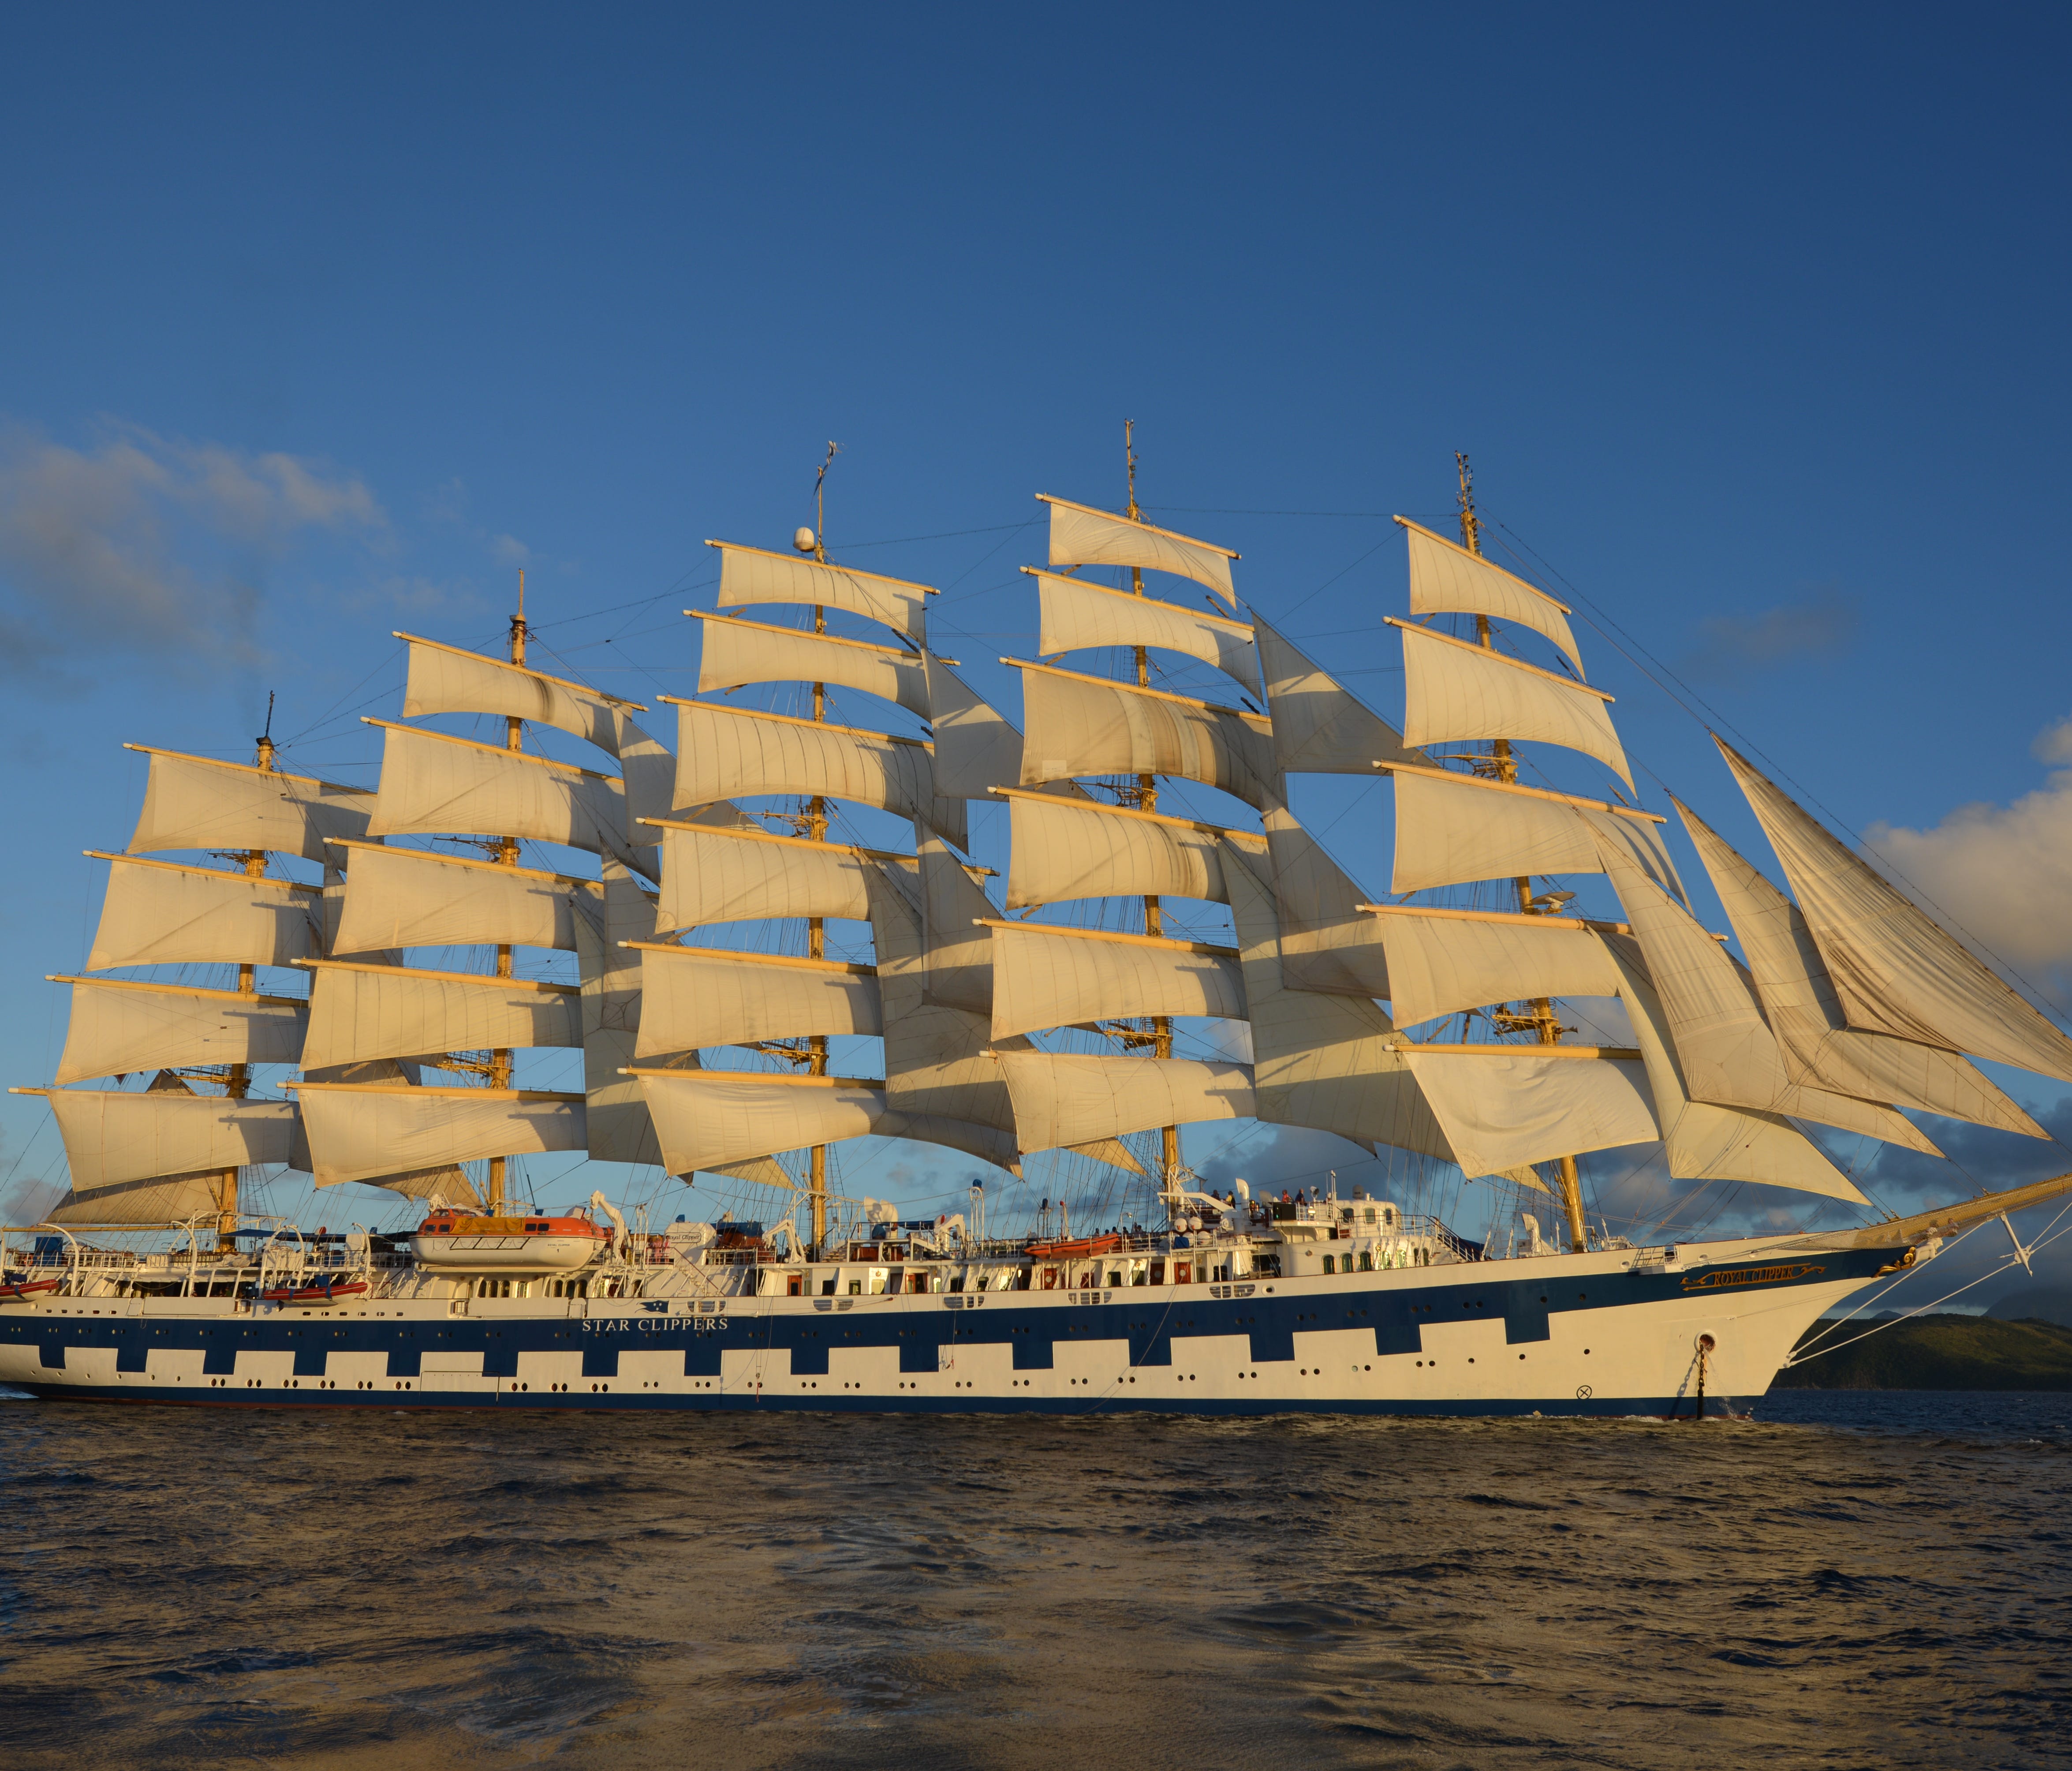 The 227-passenger Royal Clipper, operated by sailing ship line Star Clippers, is the world's largest full-rigged sailing ship.